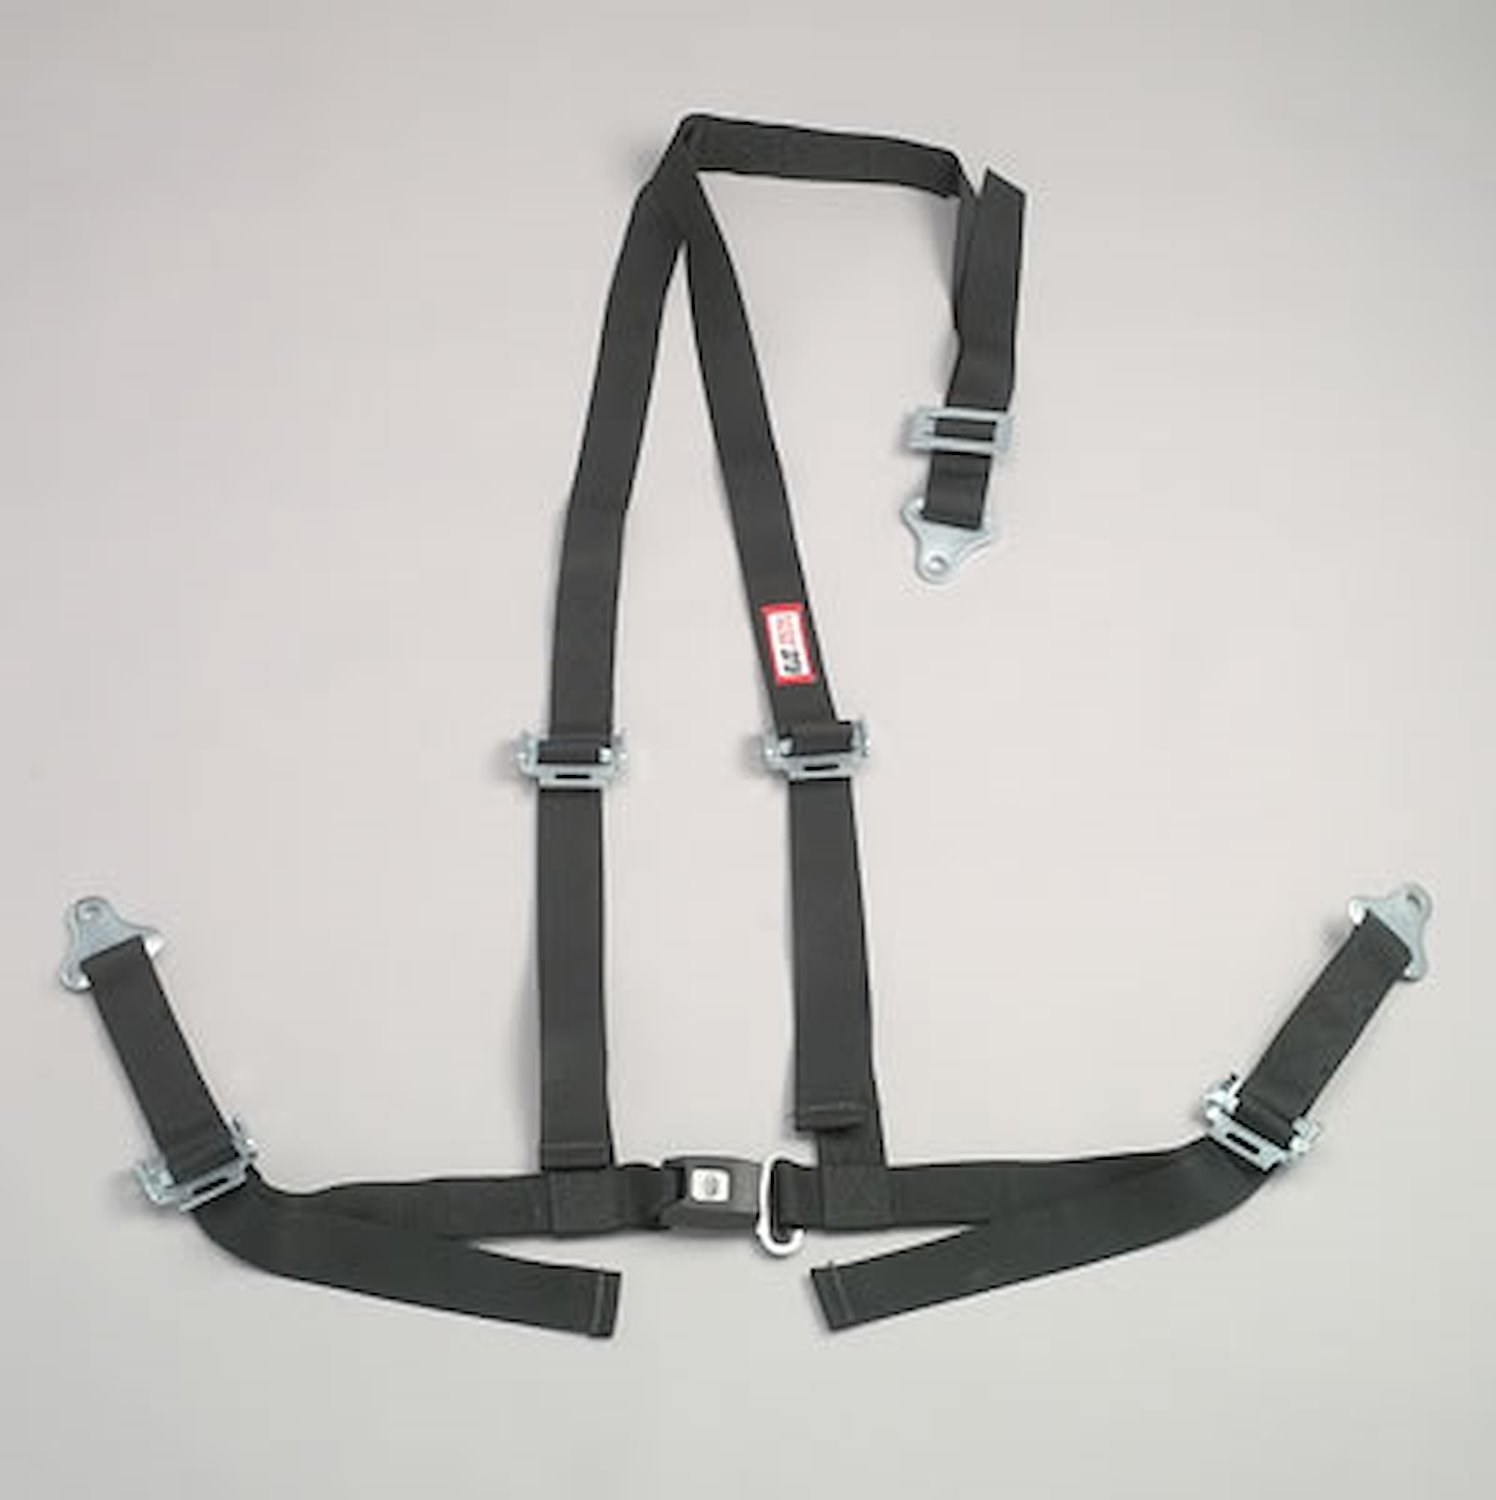 NON-SFI B&T HARNESS 2 PULL DOWN Lap Belt 2 S.H. INDIVIDUAL FLOOR Mount ALL WRAP ENDS KHAKI